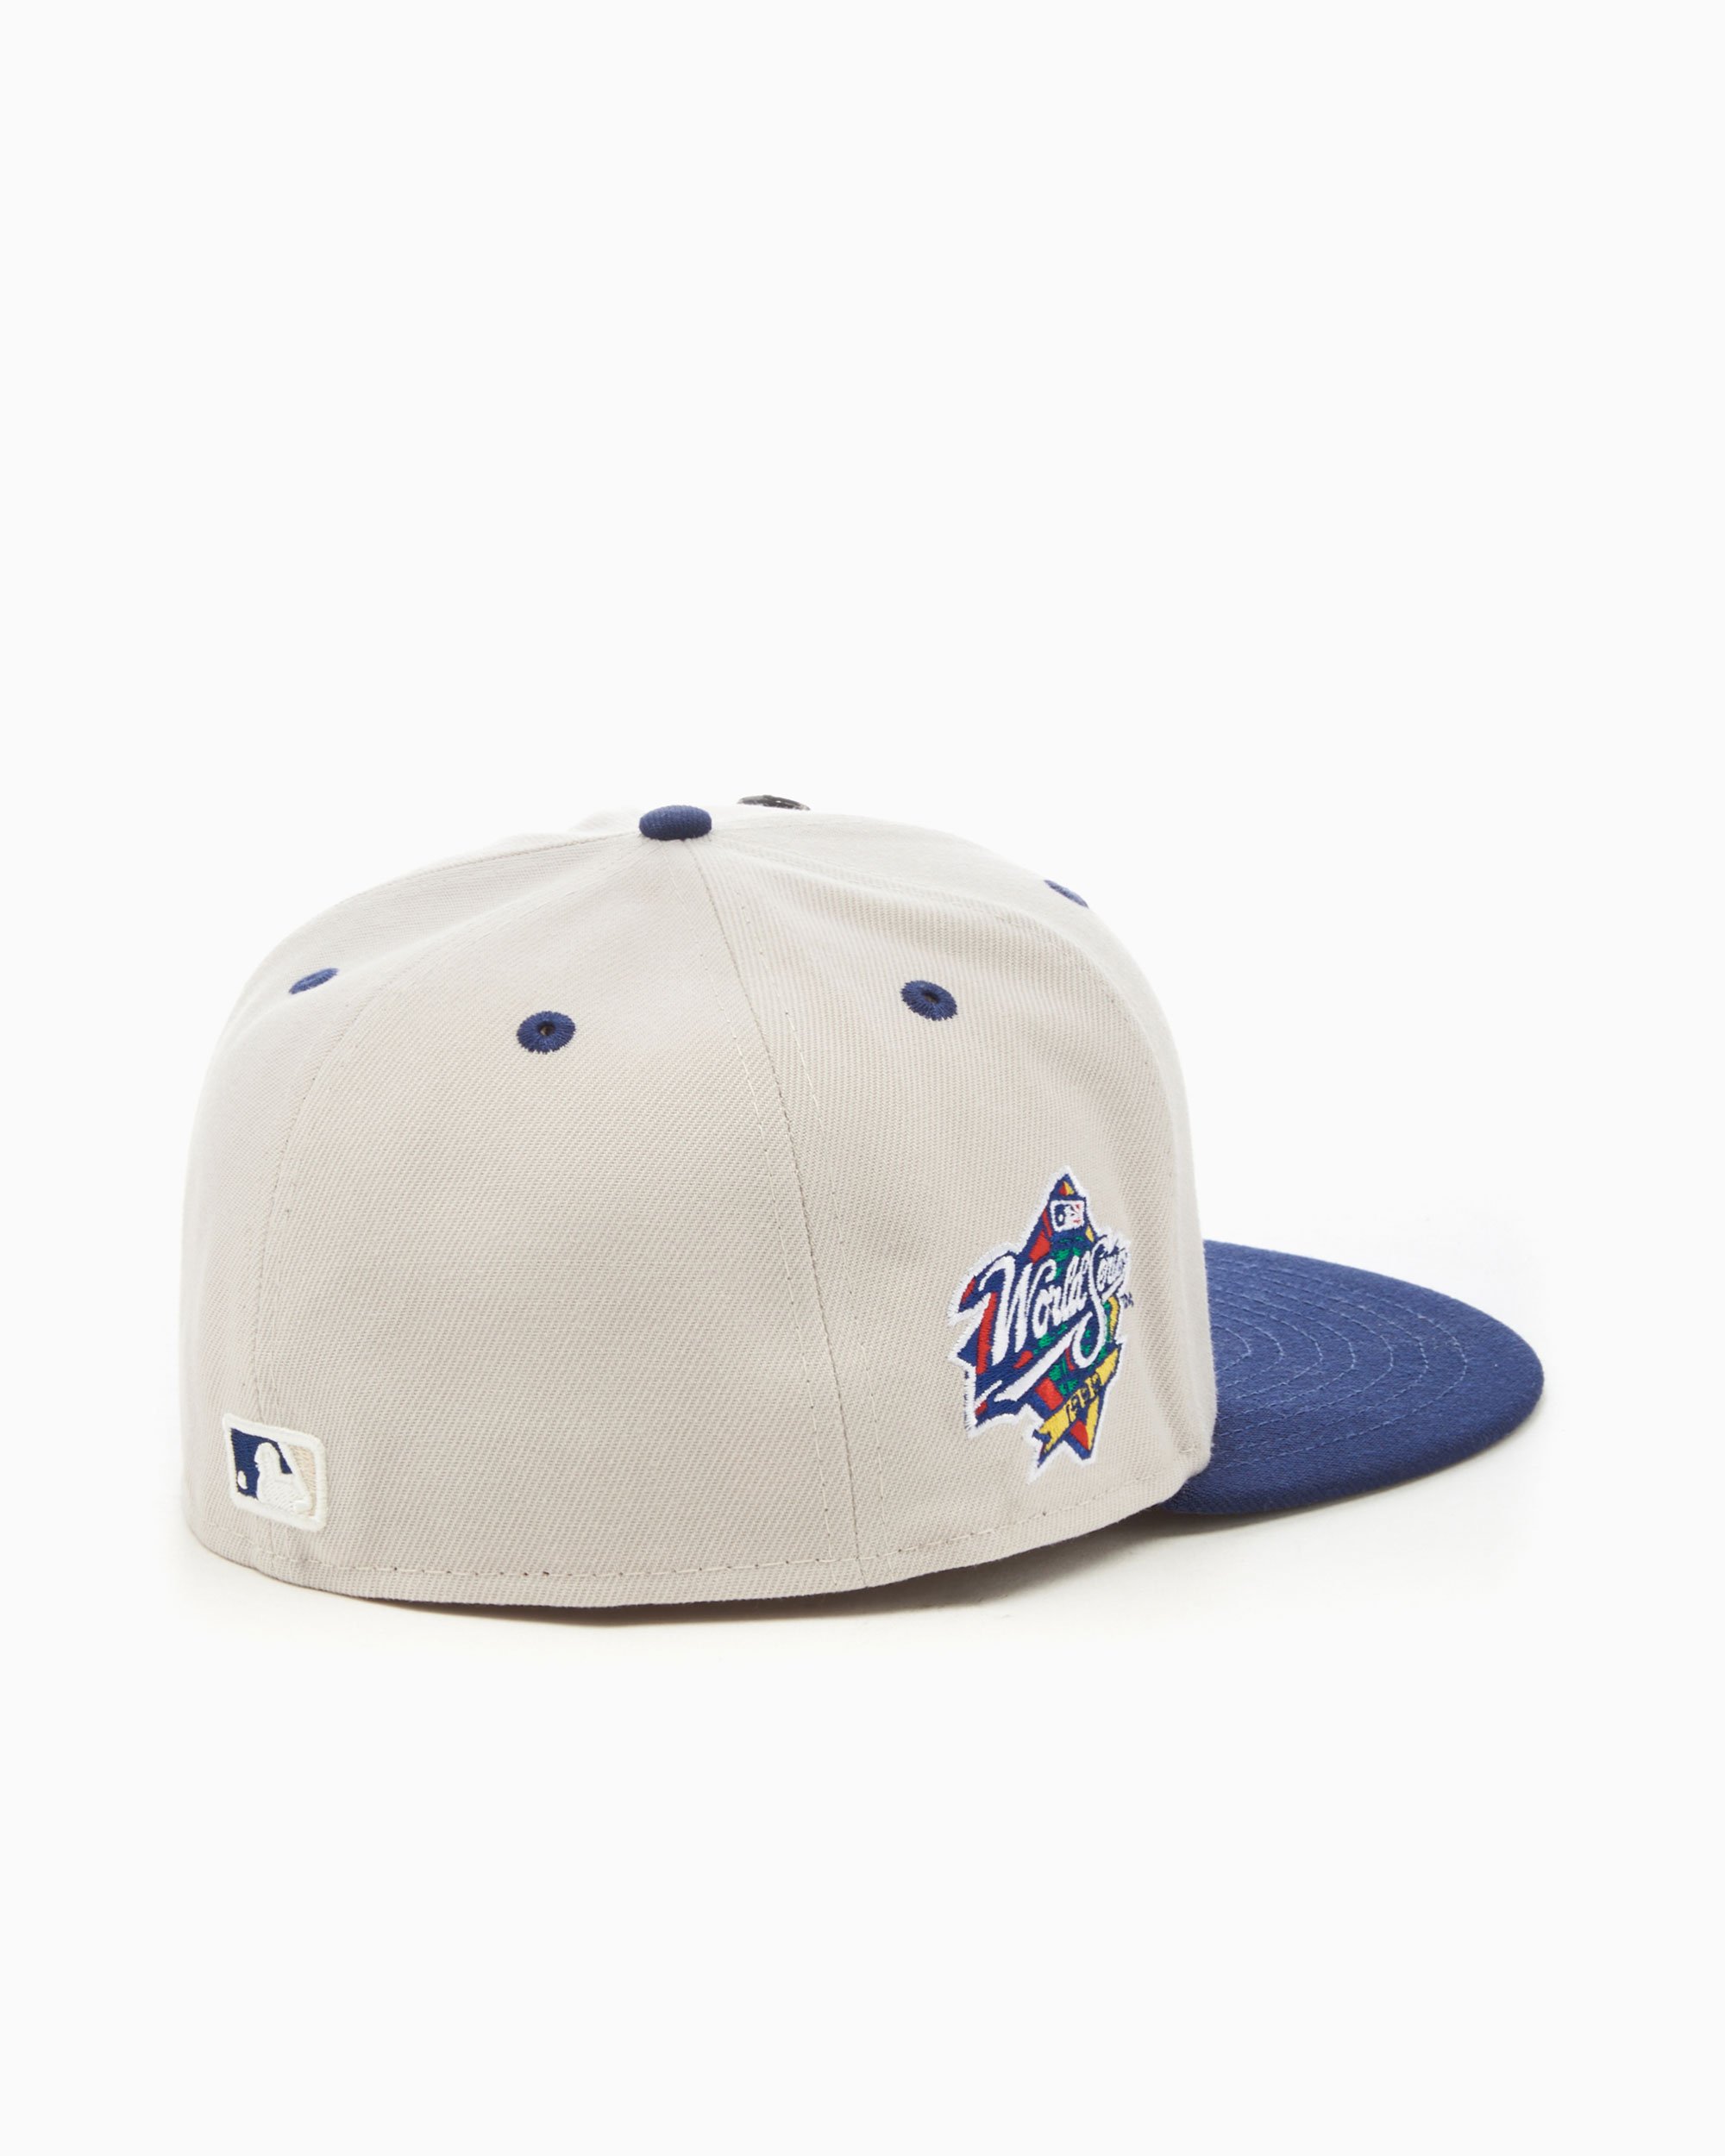 New Series Buy World Fitted Online 59FIFTY MLB Era Gray 60357993| Unisex New Yankees York at Cap FOOTDISTRICT